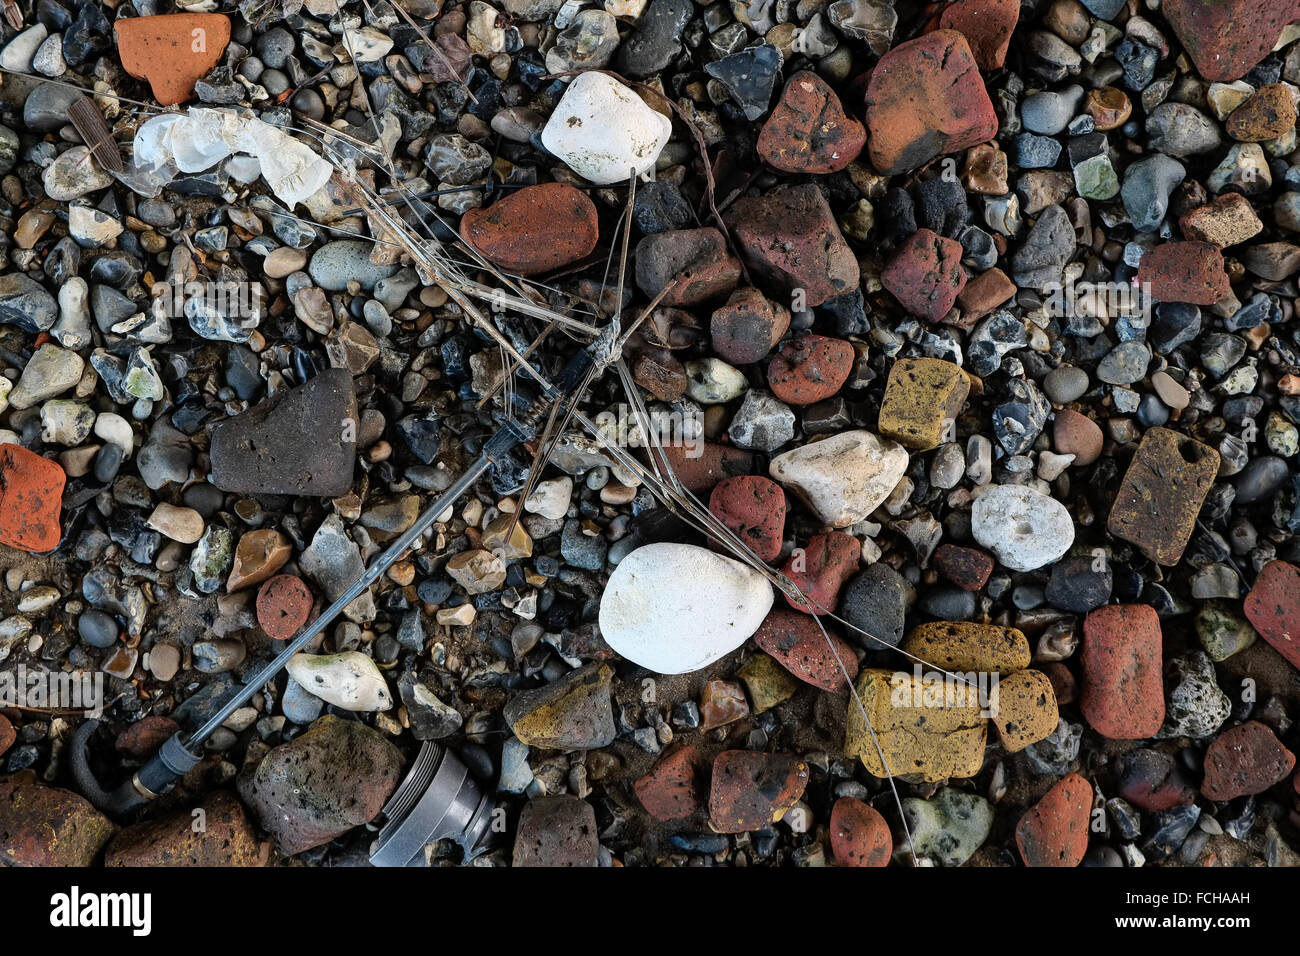 River Thames shore showing rocks and discarded umbrella Stock Photo